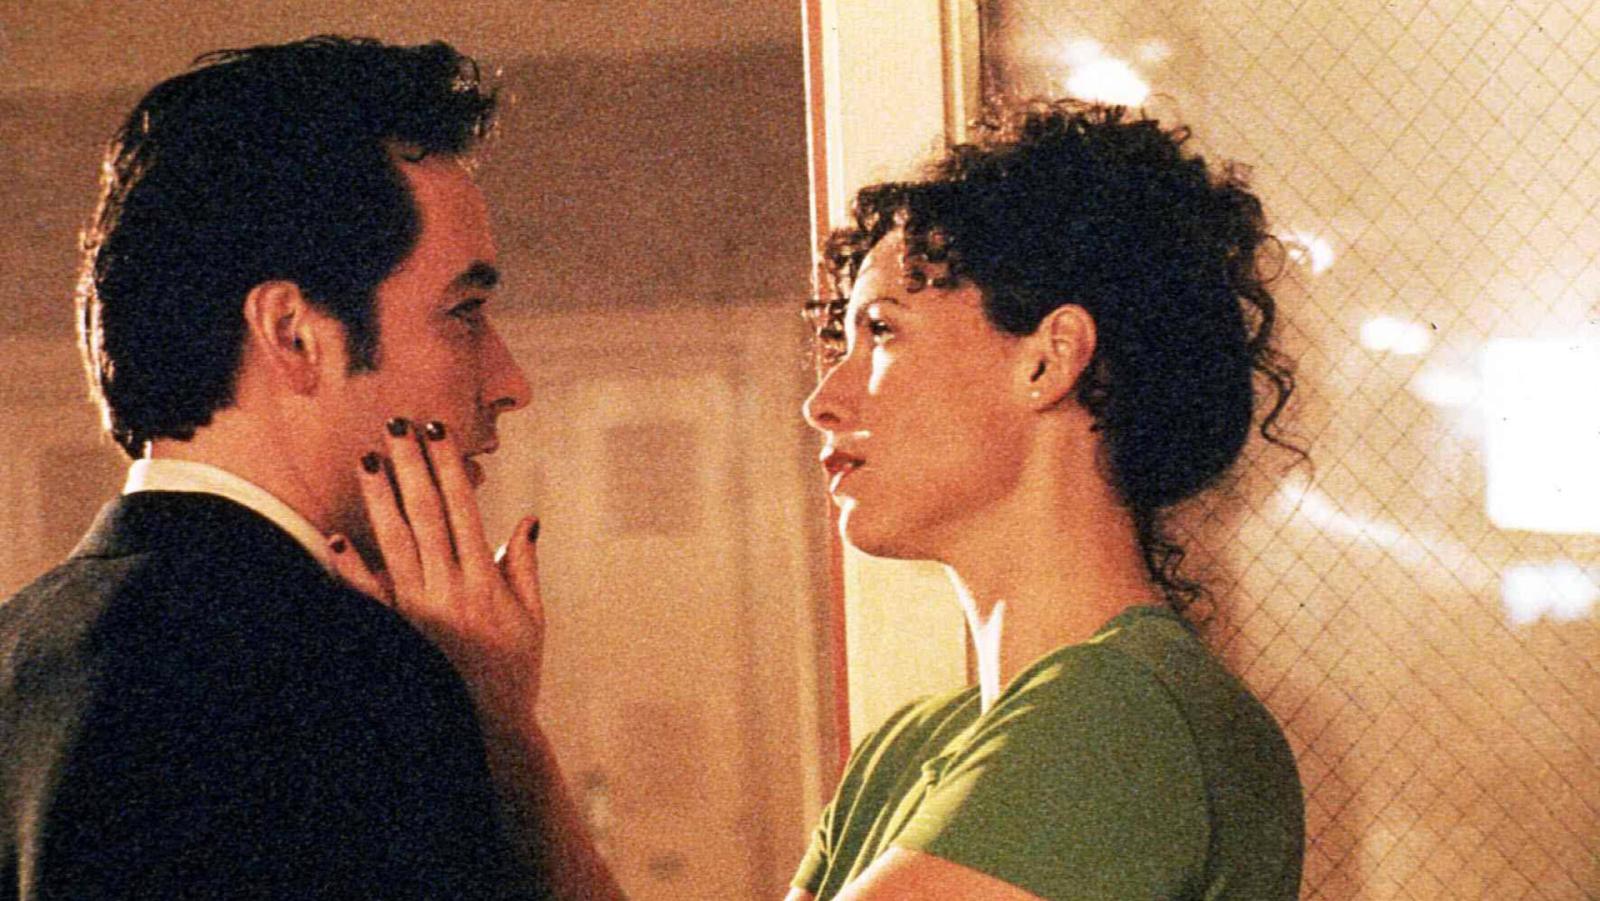 14 Underrated Romantic Comedies From the 90s Worth Revisiting - image 14